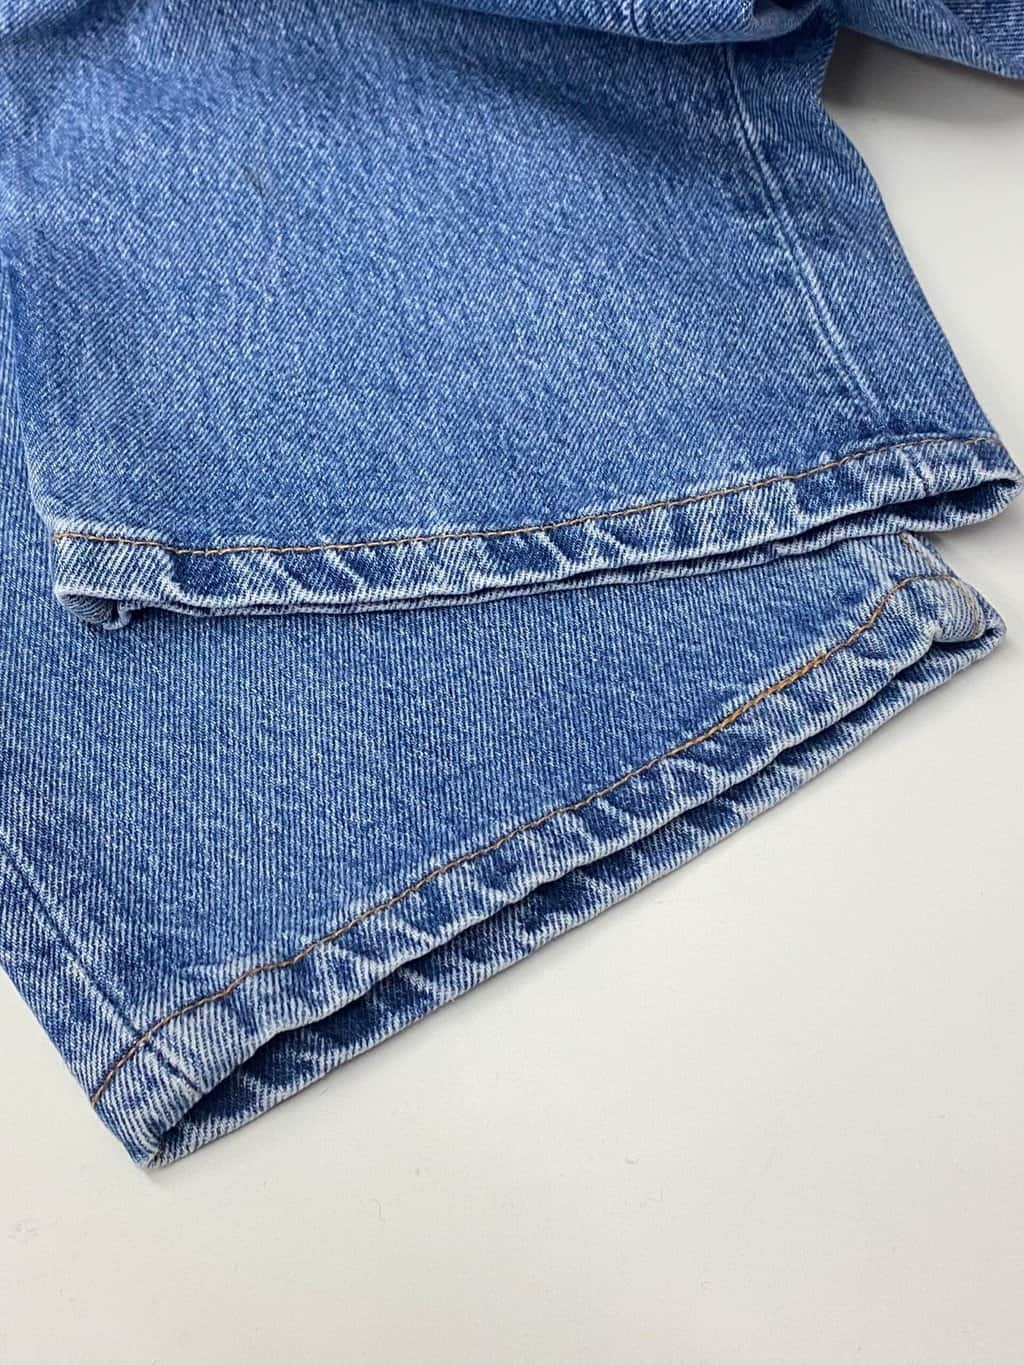 90s vintage Levis 501 jeans USA made blue stonewash with red tab